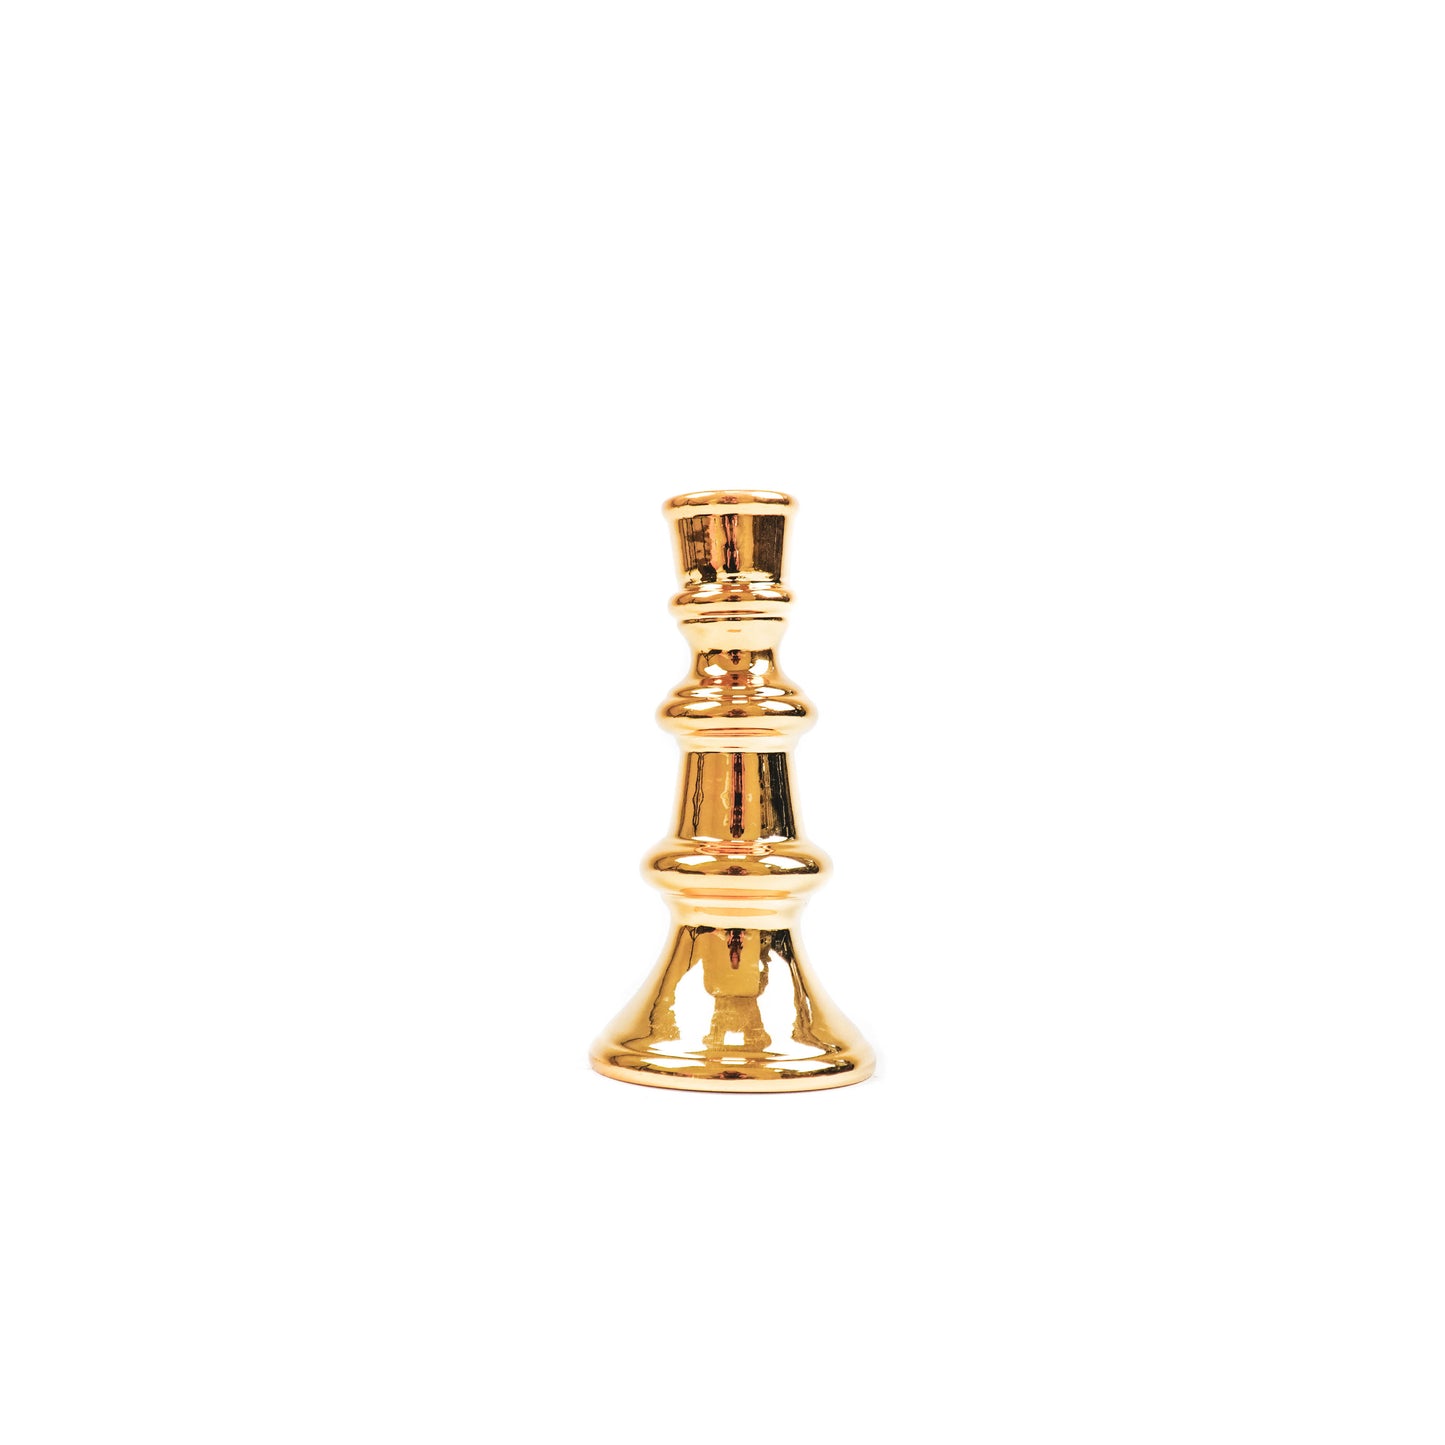 HV Chess Candle holder - Gold - M - 7x7x14cm